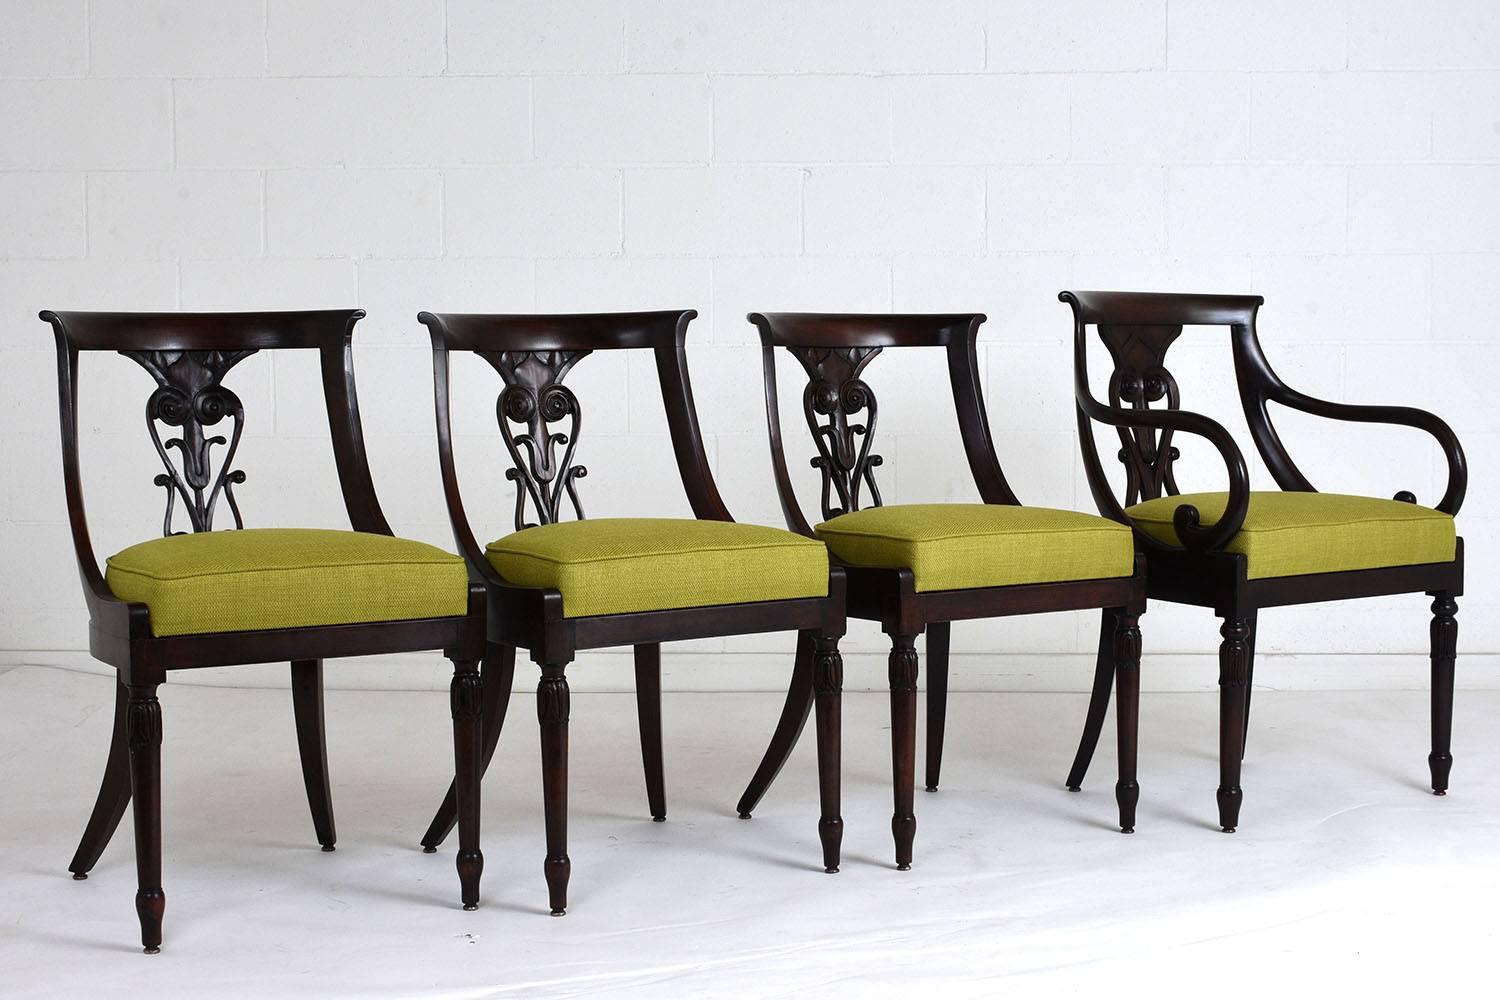 This Antique Set of Four Hollywood Regency-style Dining Chairs has been handcrafted out of mahogany wood stained in deep mahogany color with a polished finish and is fully restored. The set features three side chairs, an armchair, and the seats have